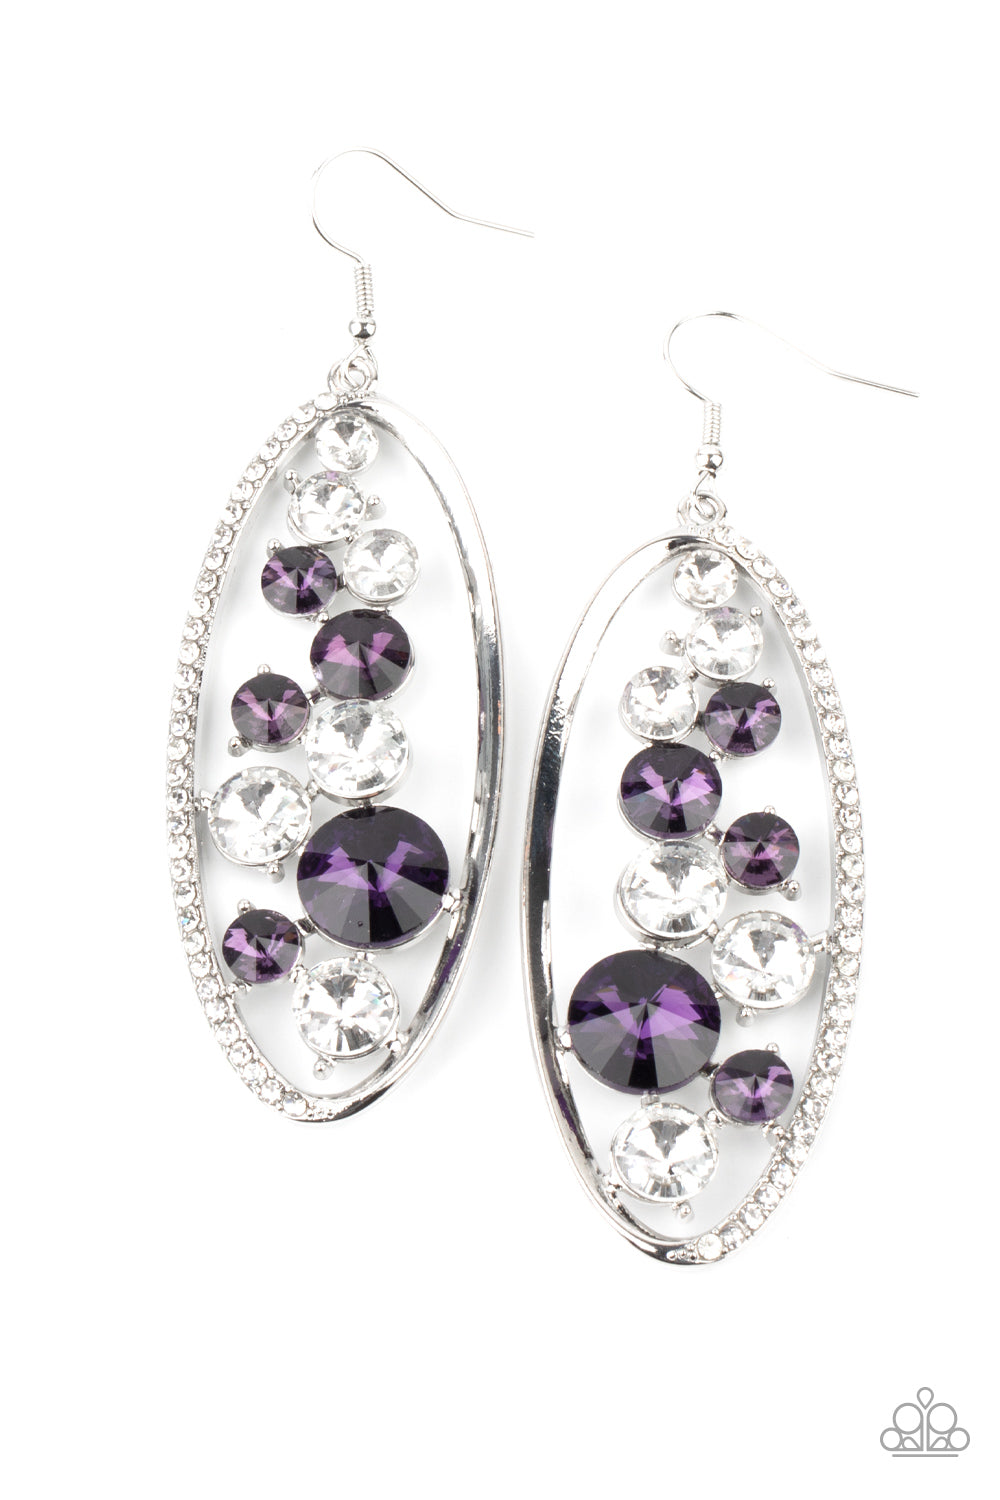 Rock Candy Bubbly - Purple Rhinestone Necklaces - Paparazzi Accessories oversized collection of glassy white and glittery purple rhinestones sparkle inside a silver oval frame. One side of the frame is encrusted in dainty white rhinestones, adding a refined flair to the bubbly lure. Earring attaches to a standard fishhook fitting.  Sold as one pair of earrings.